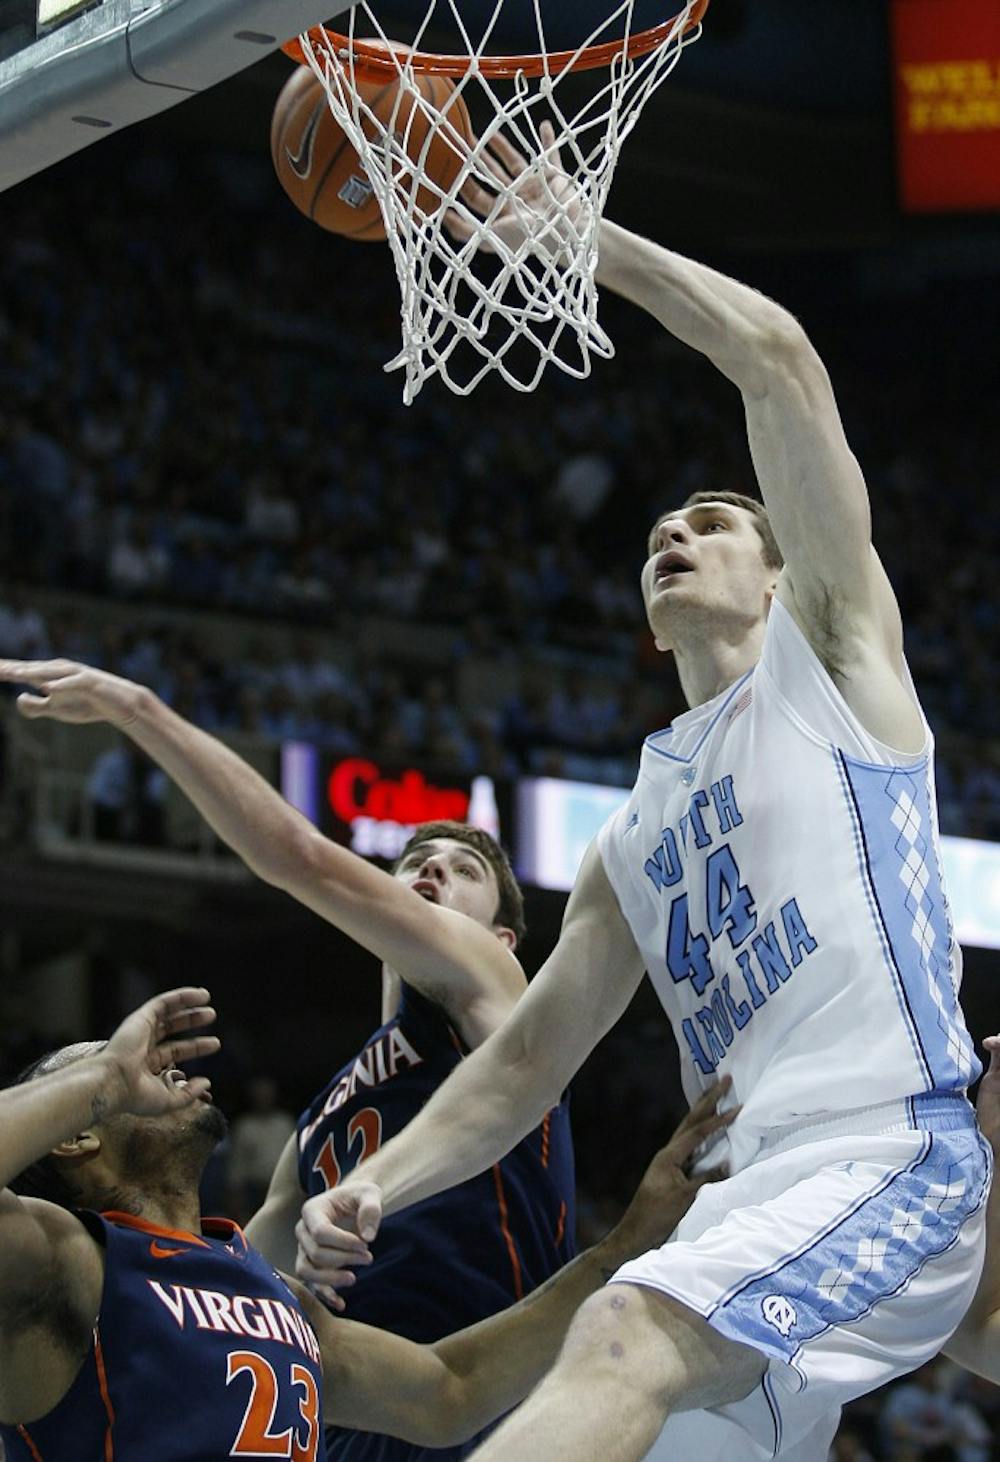 UNC forward Tyler Zeller takes the ball to the hoop during the first half of the game against the Virginia Cavaliers on Saturday. Zeller led the Tar Heels in scoring with 25 points in the 70-52 win over the Cavaliers. 